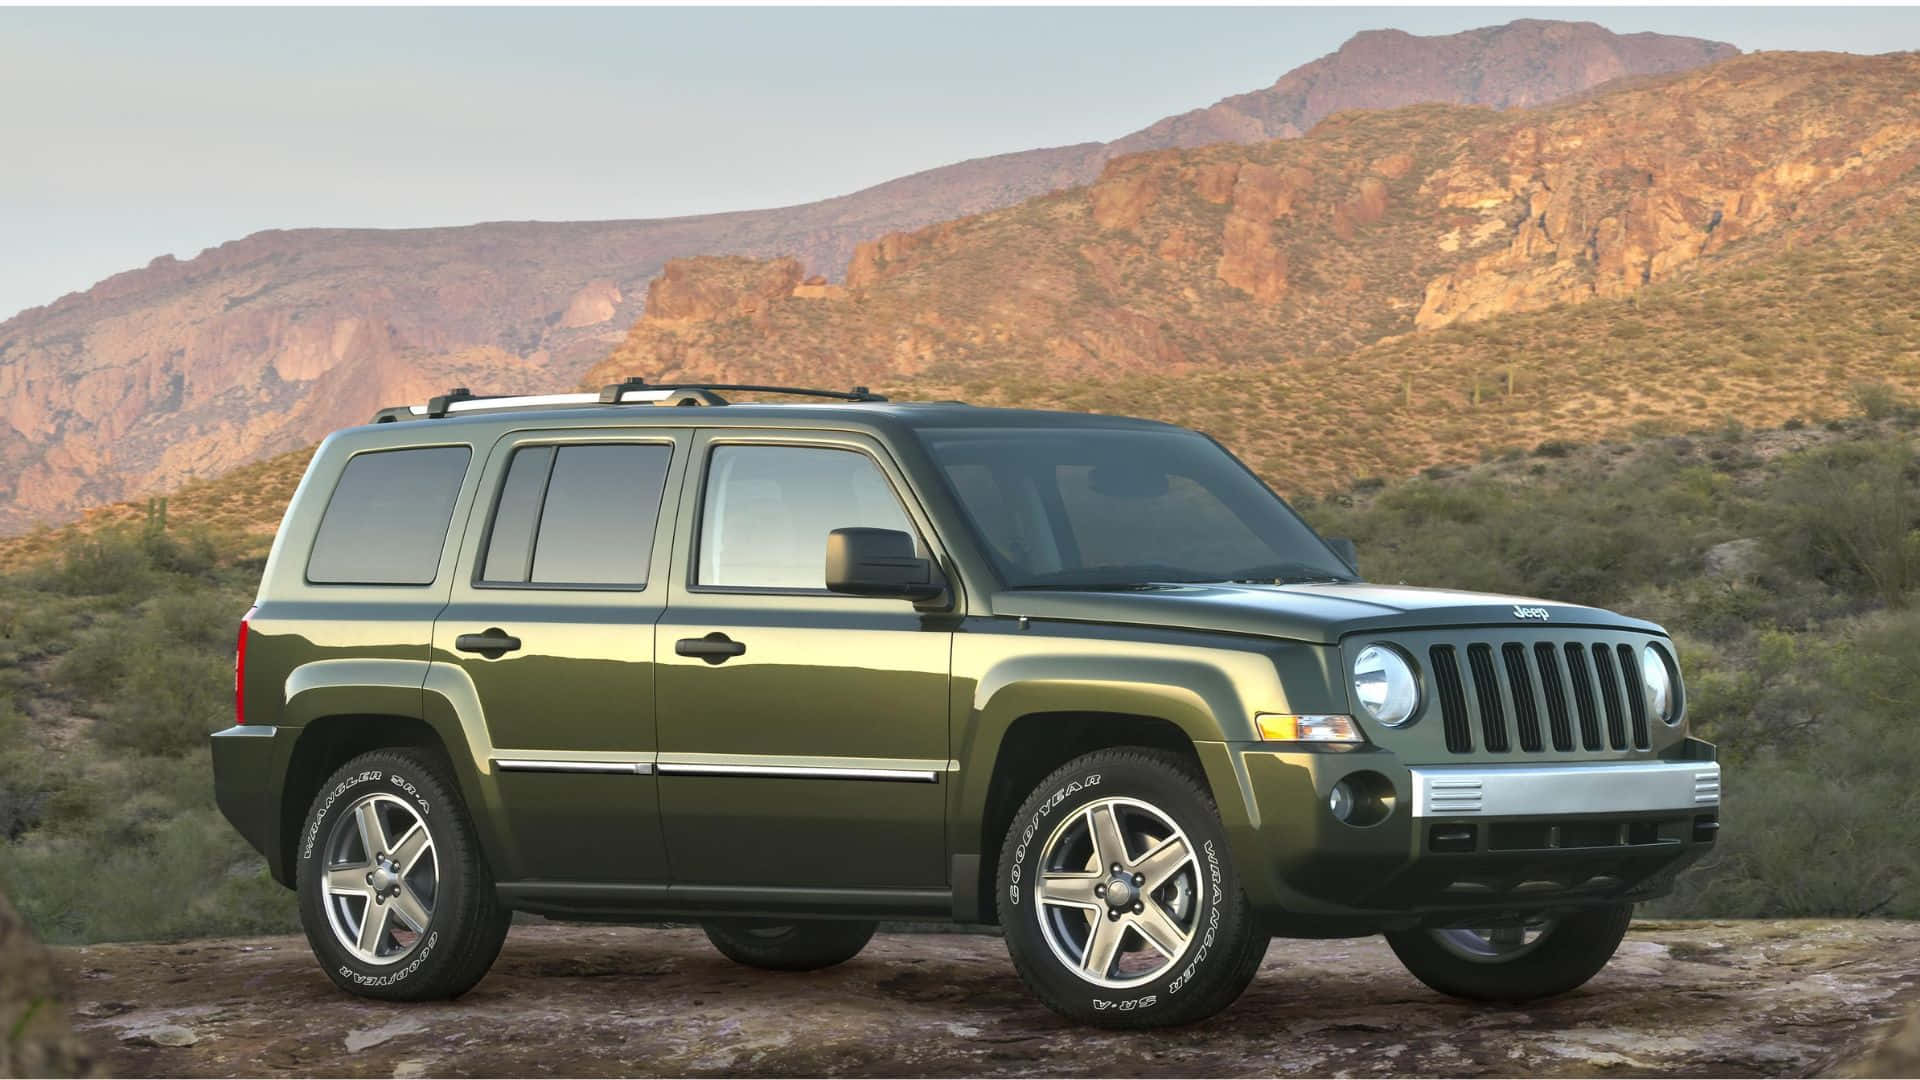 Jeep Patriot - the Ultimate Off-Road Adventure Wallpaper